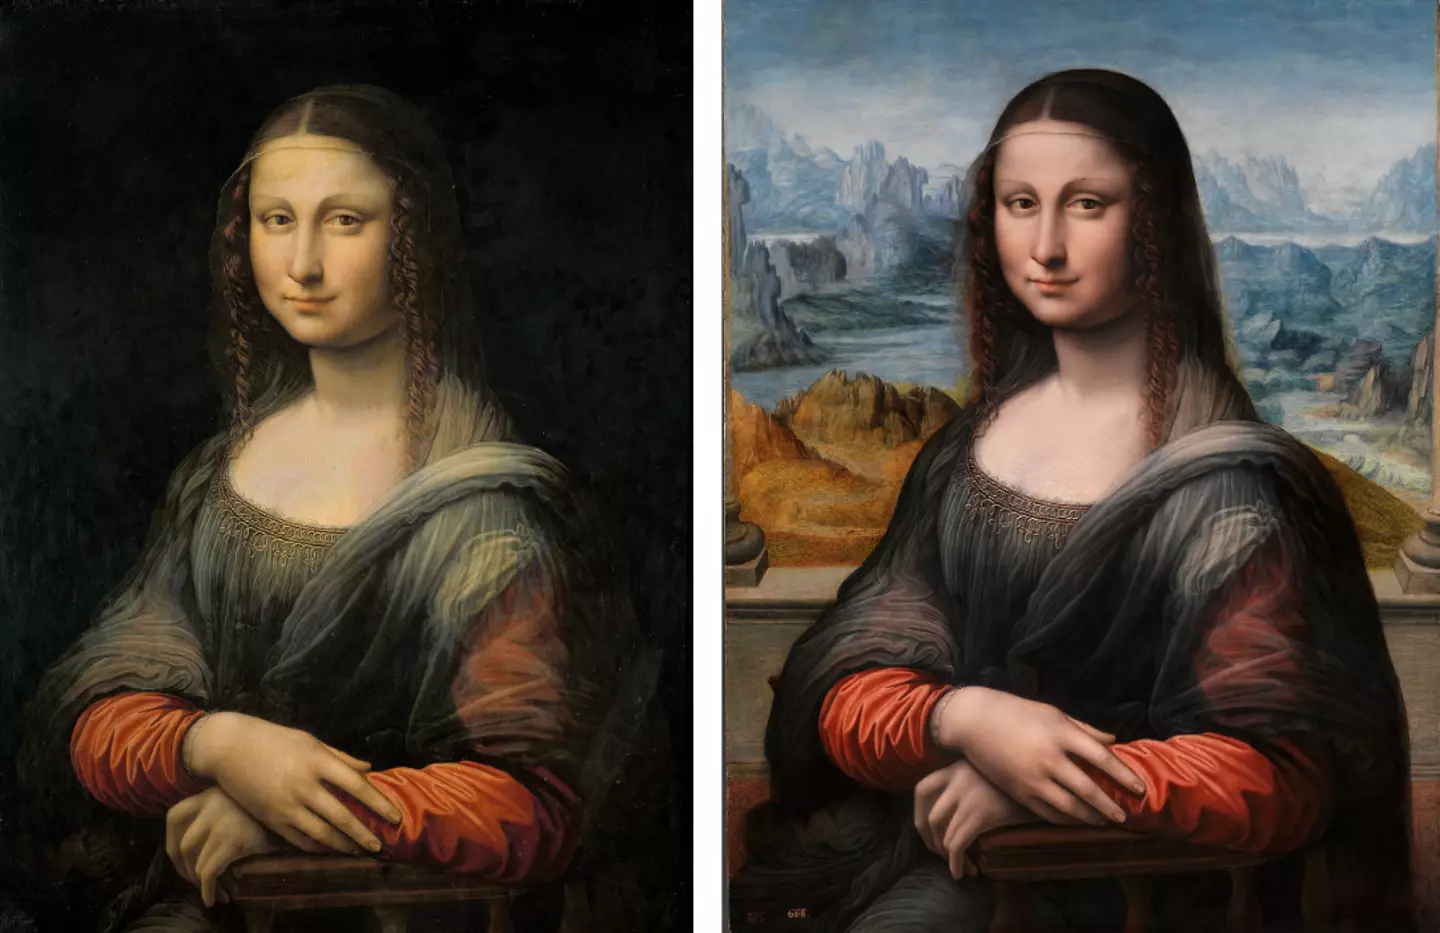 The Mona Lisa copy before (L) and after (R) being restored.